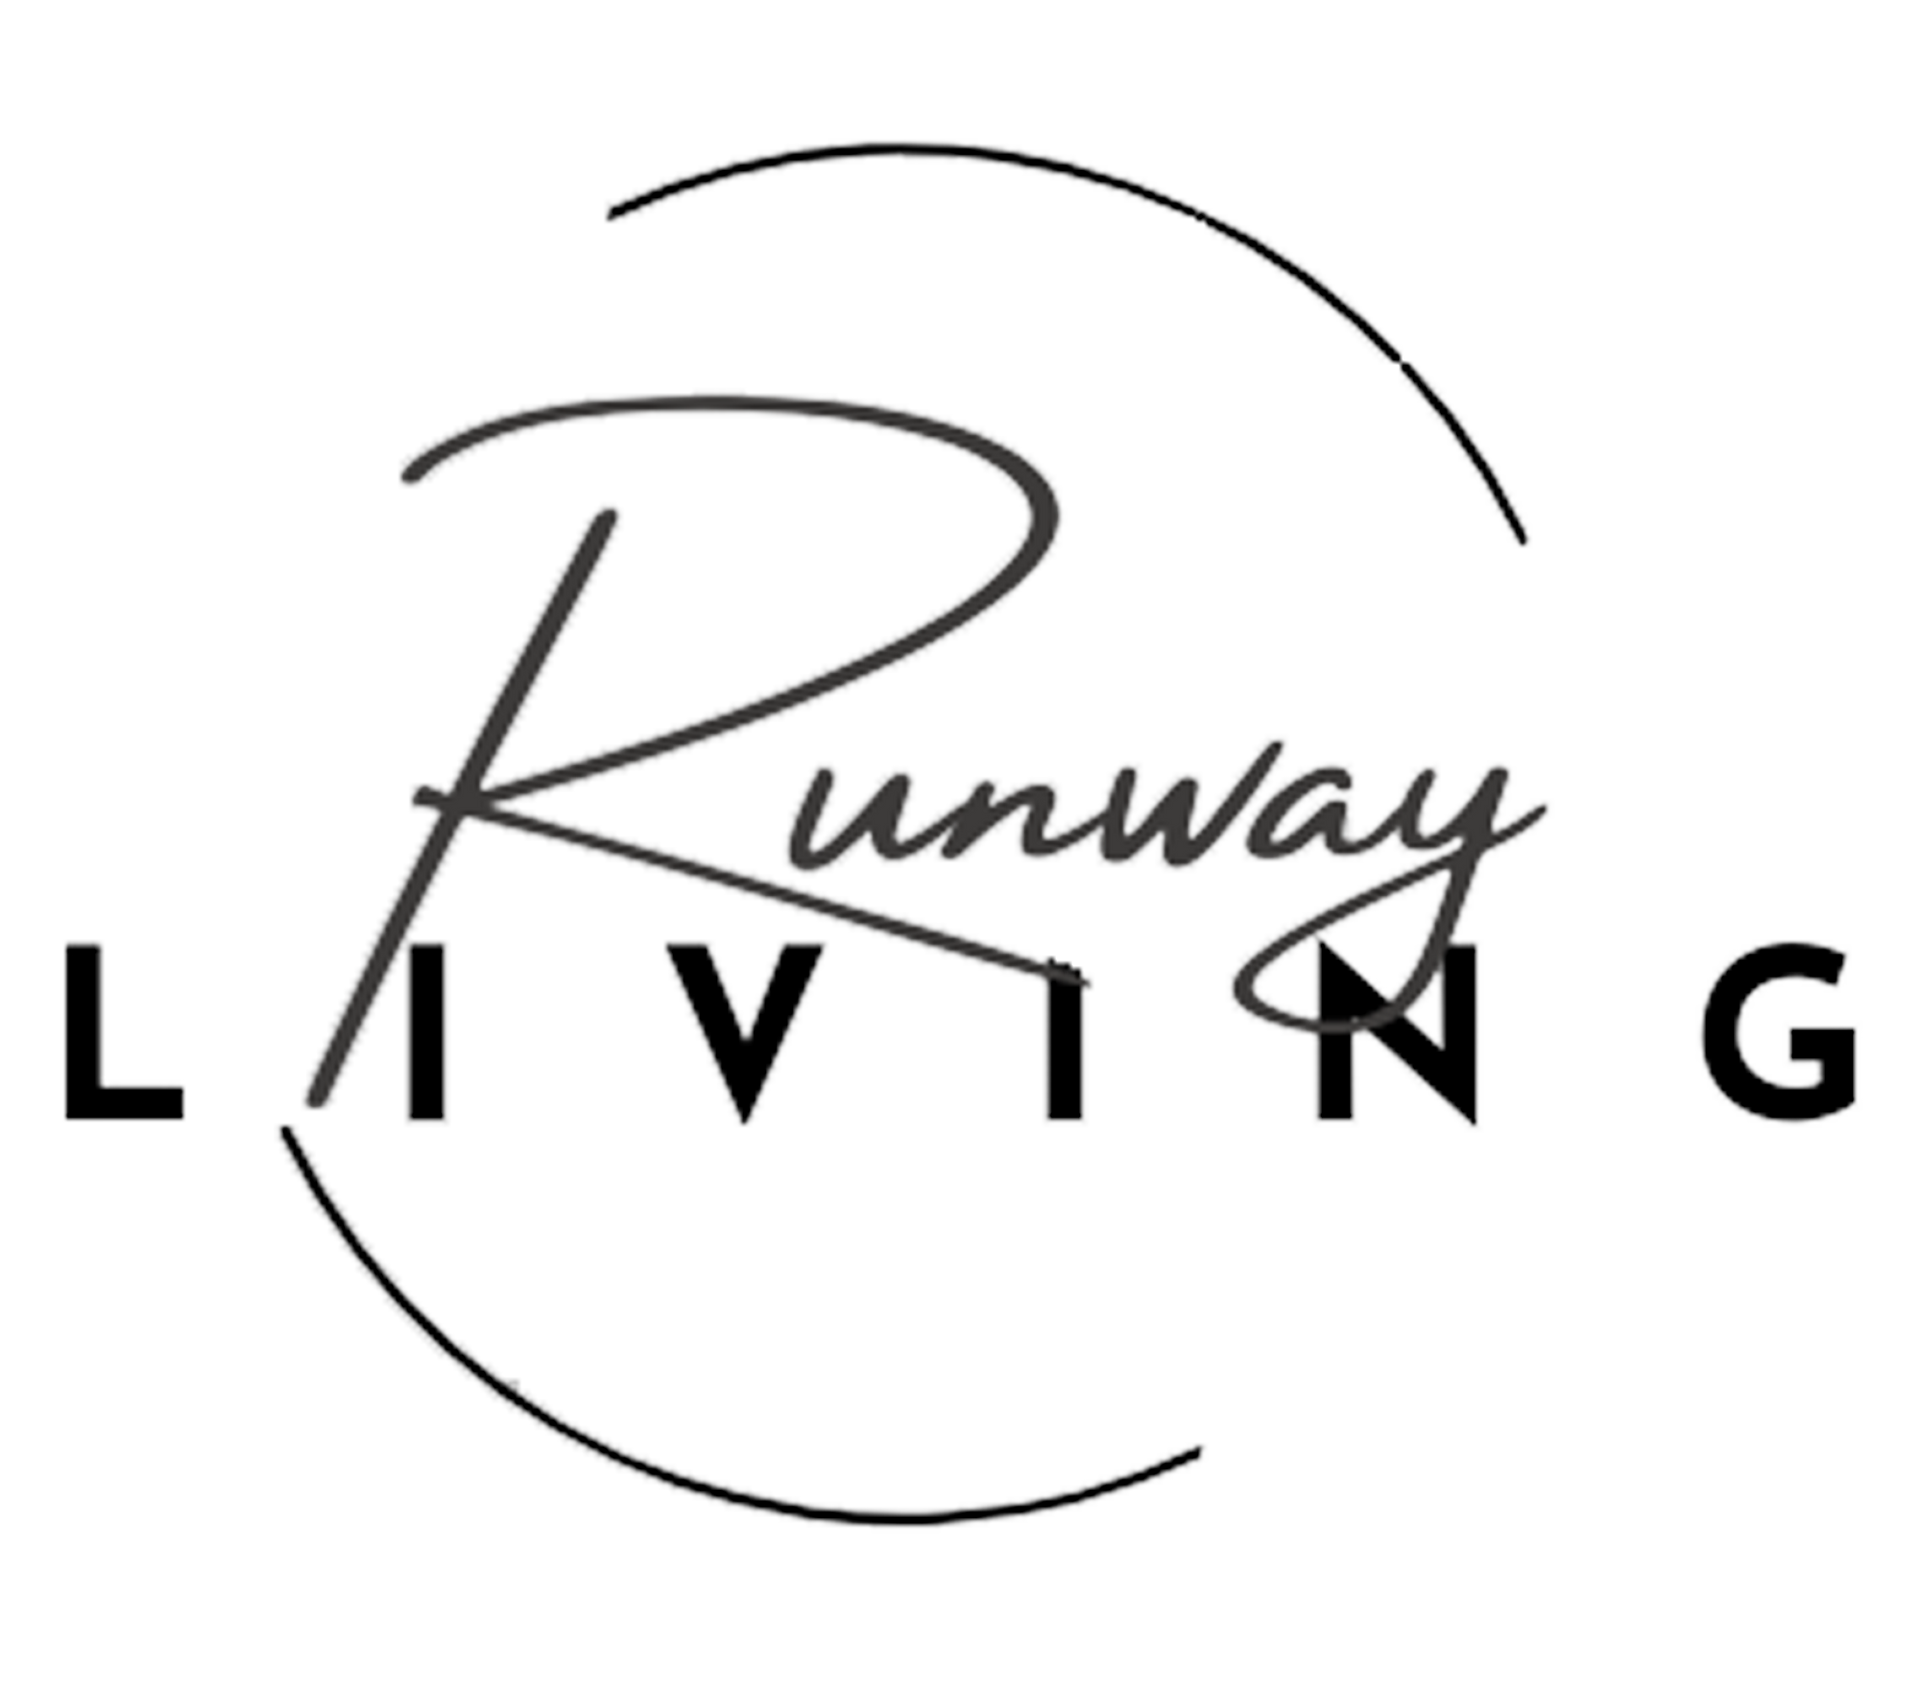 Runway Living company logo - click to go to home page